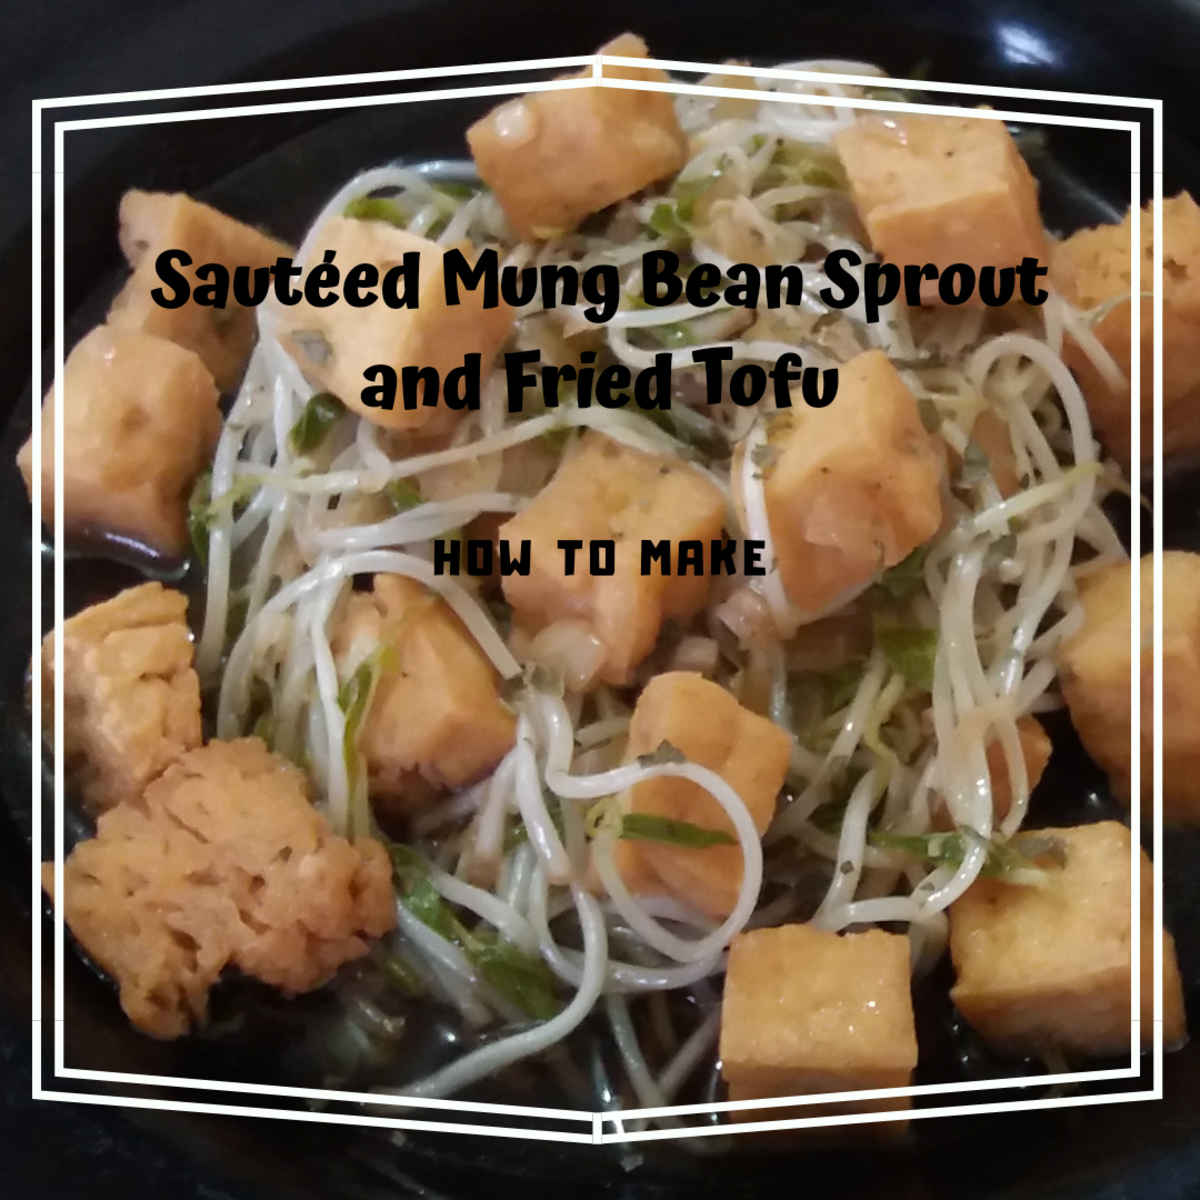 How to Make Fried Tofu With Mung Bean Sprouts